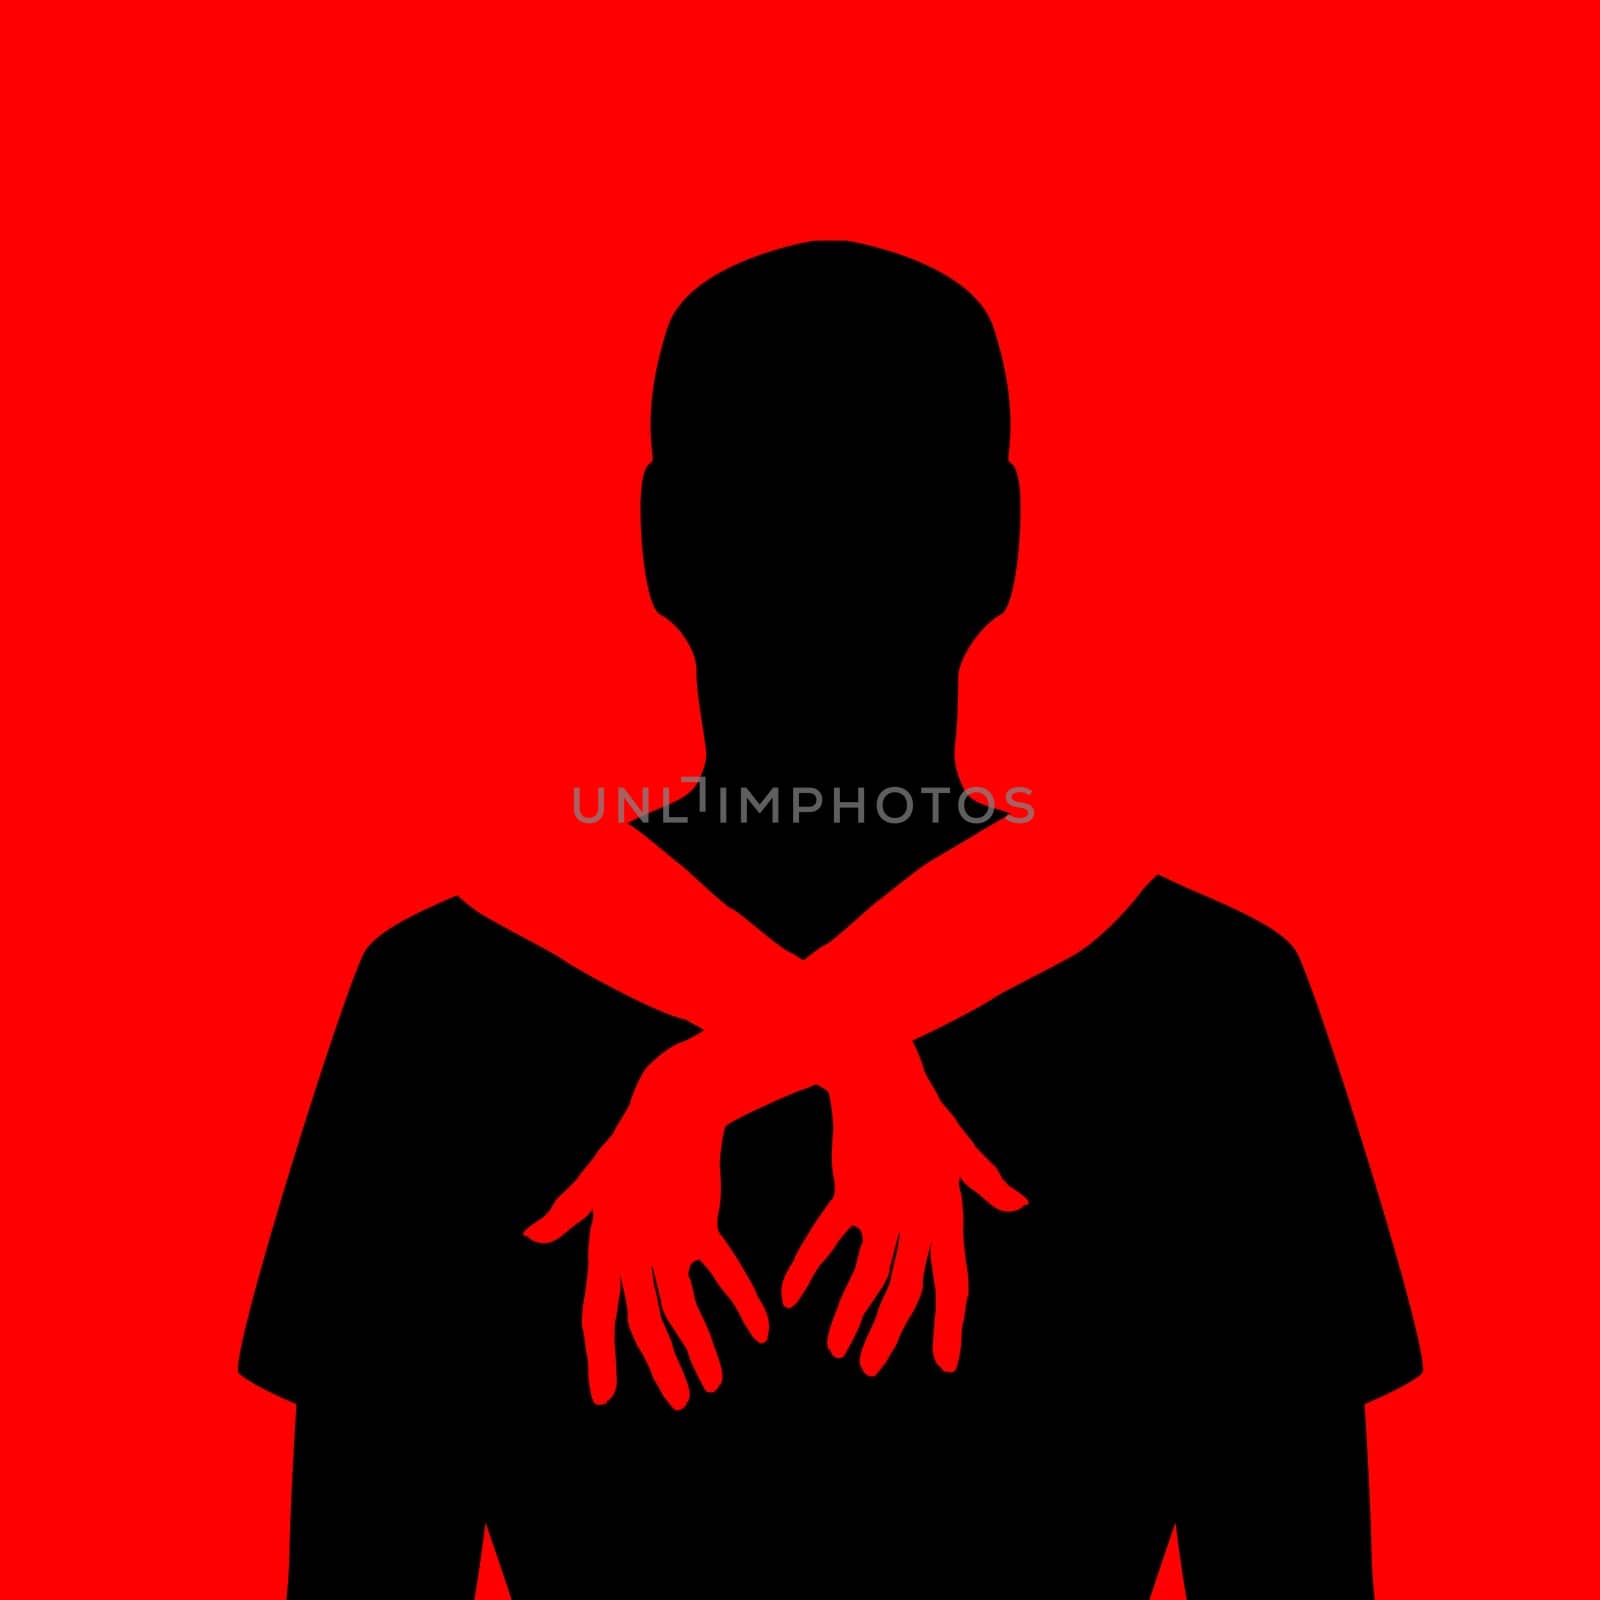 Woman's arms hugs a man silhouette by hibrida13